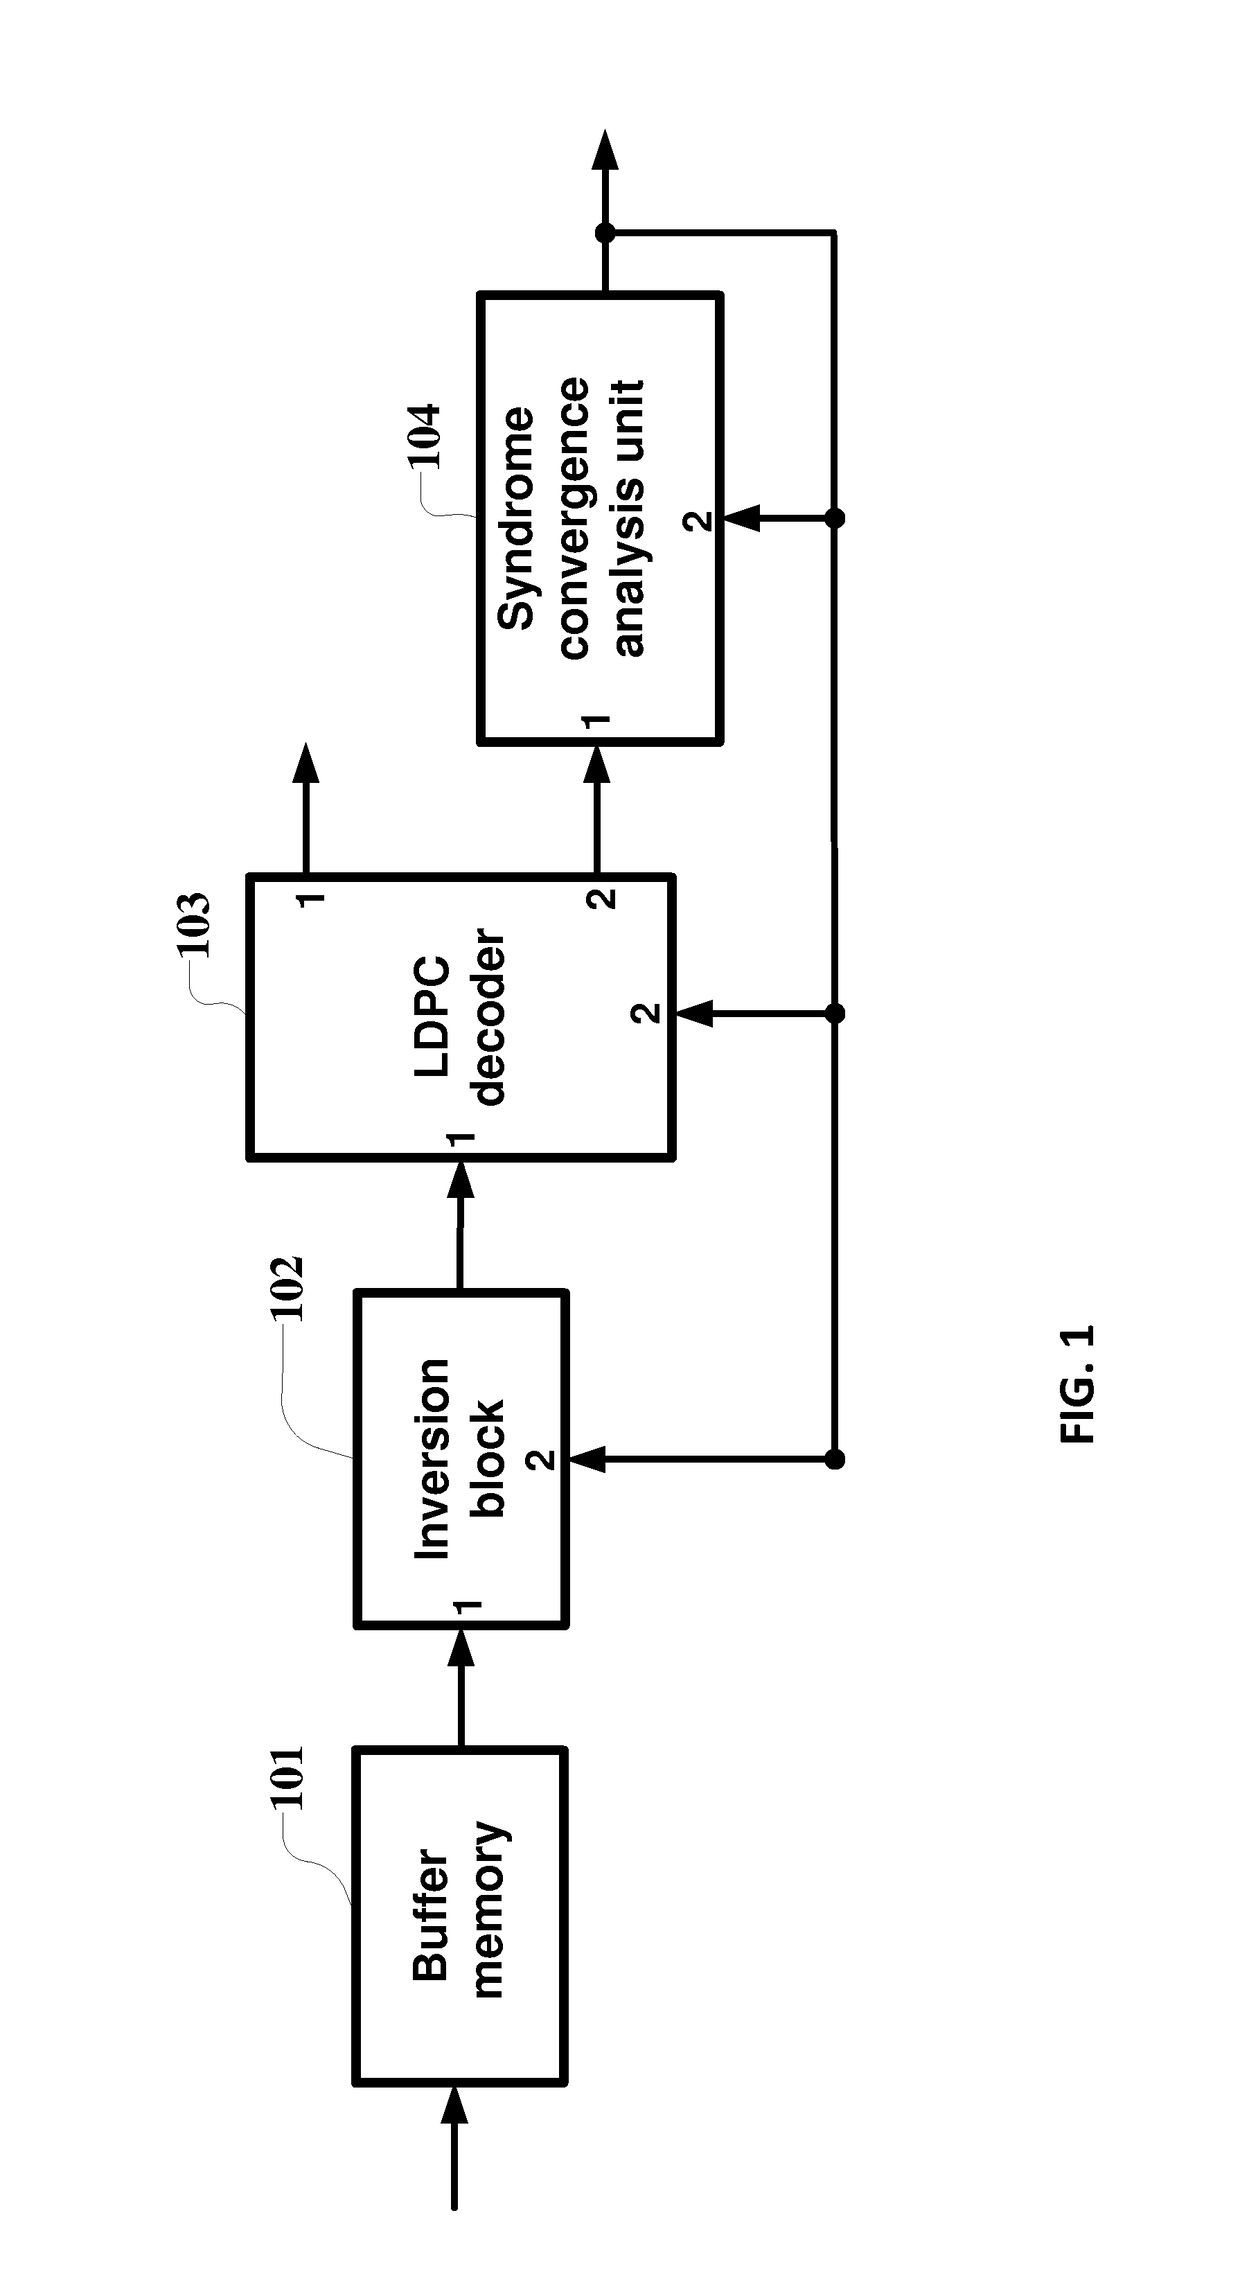 Method and apparatus for identification and compensation for inversion of input bit stream in Ldpc decoding